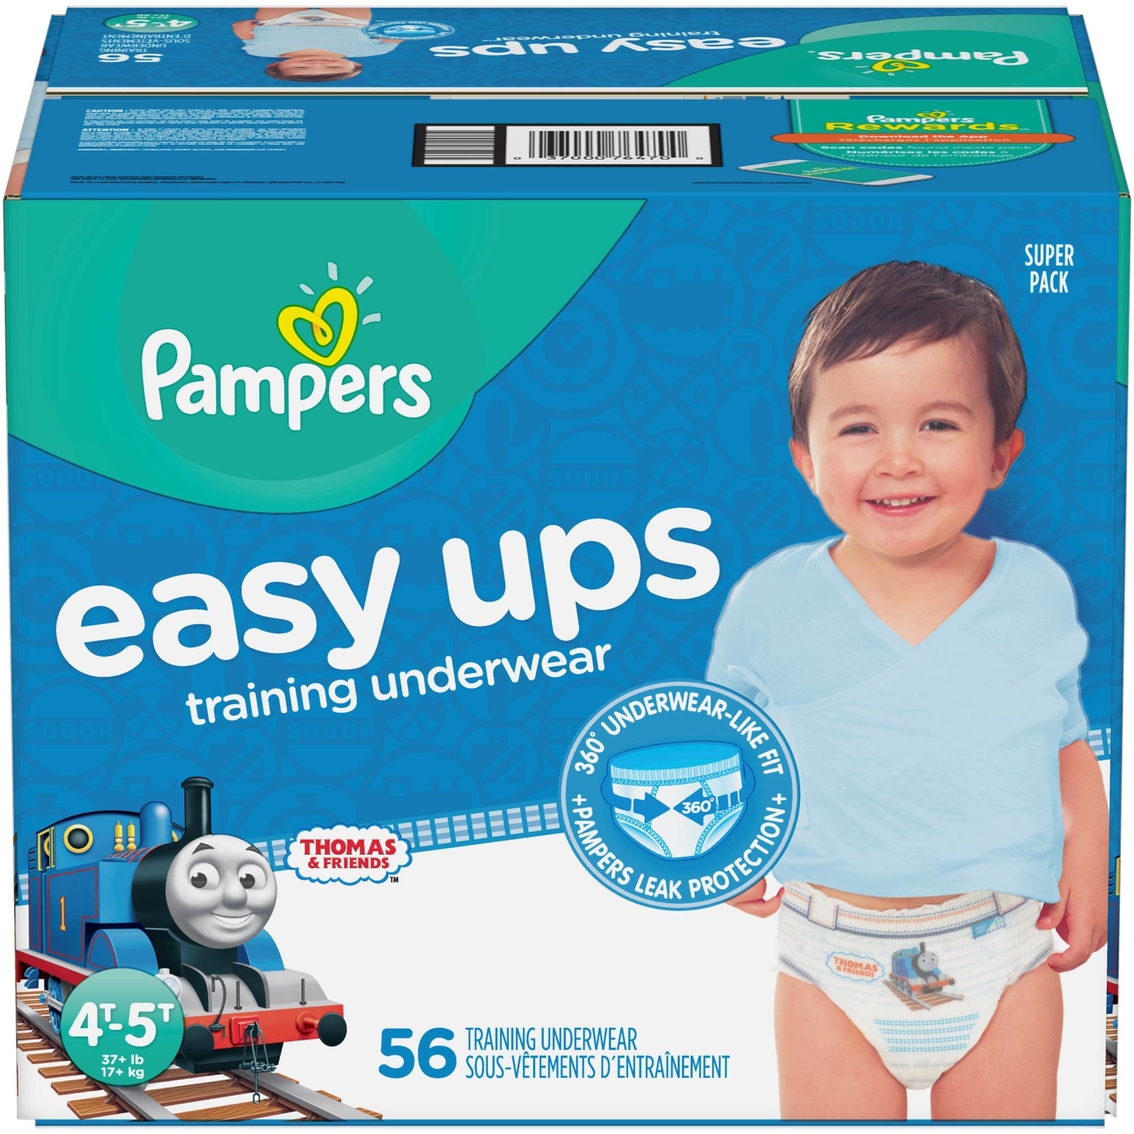 Pampers Potty Training Underwear for Toddlers, Size 6 (4T-5T